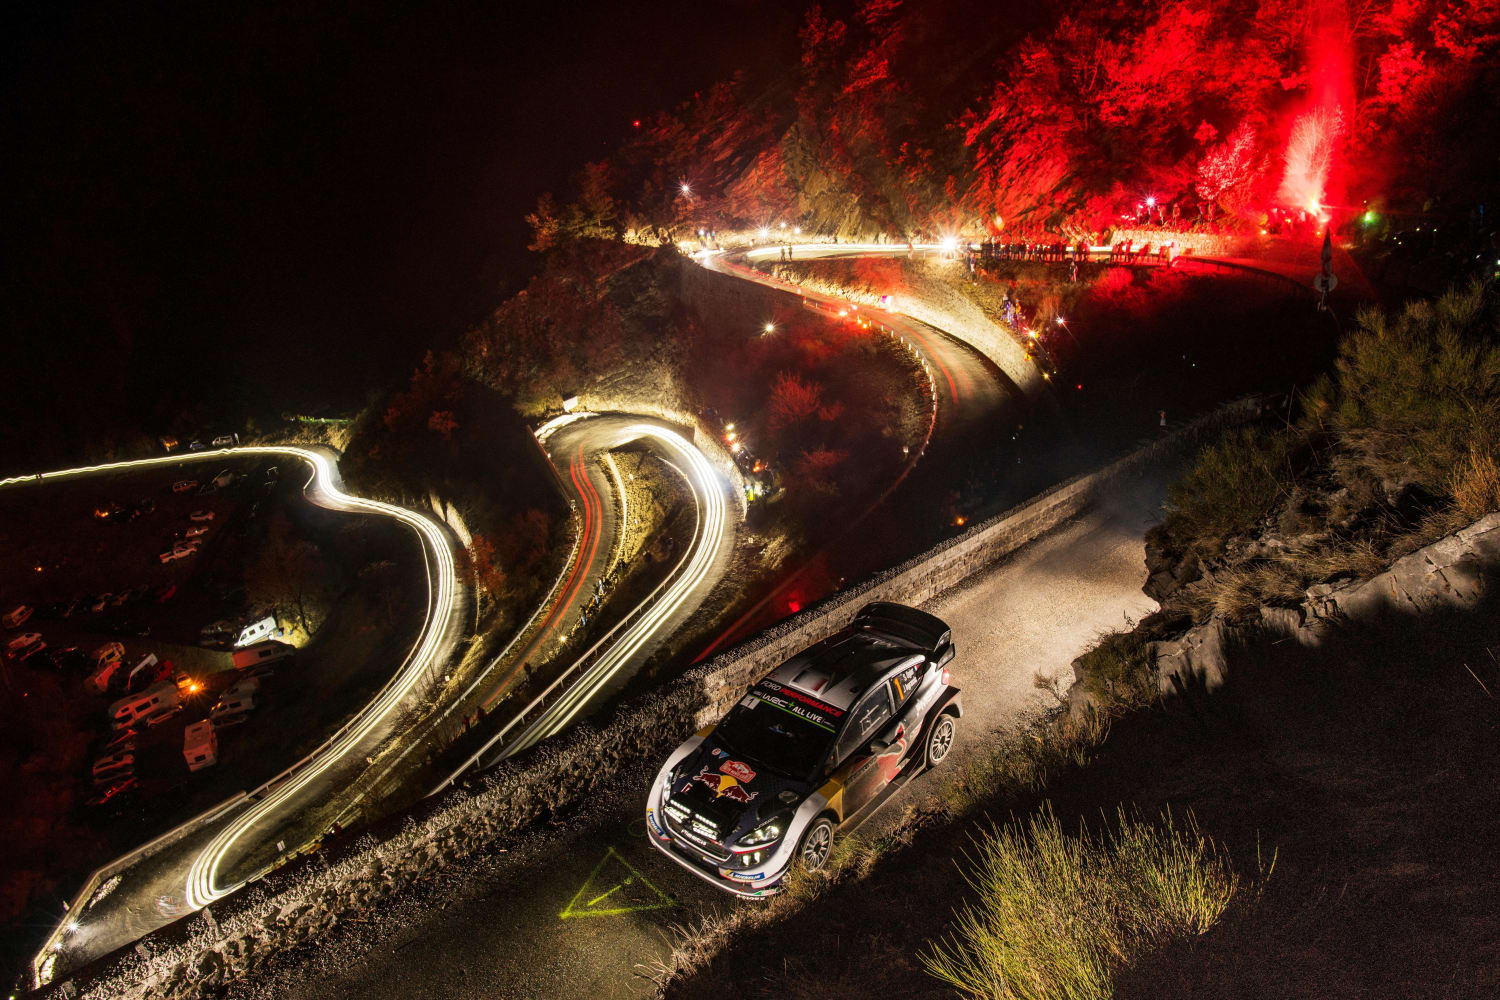 Check Out Some Amazing Wrc Images By Jaanus Ree